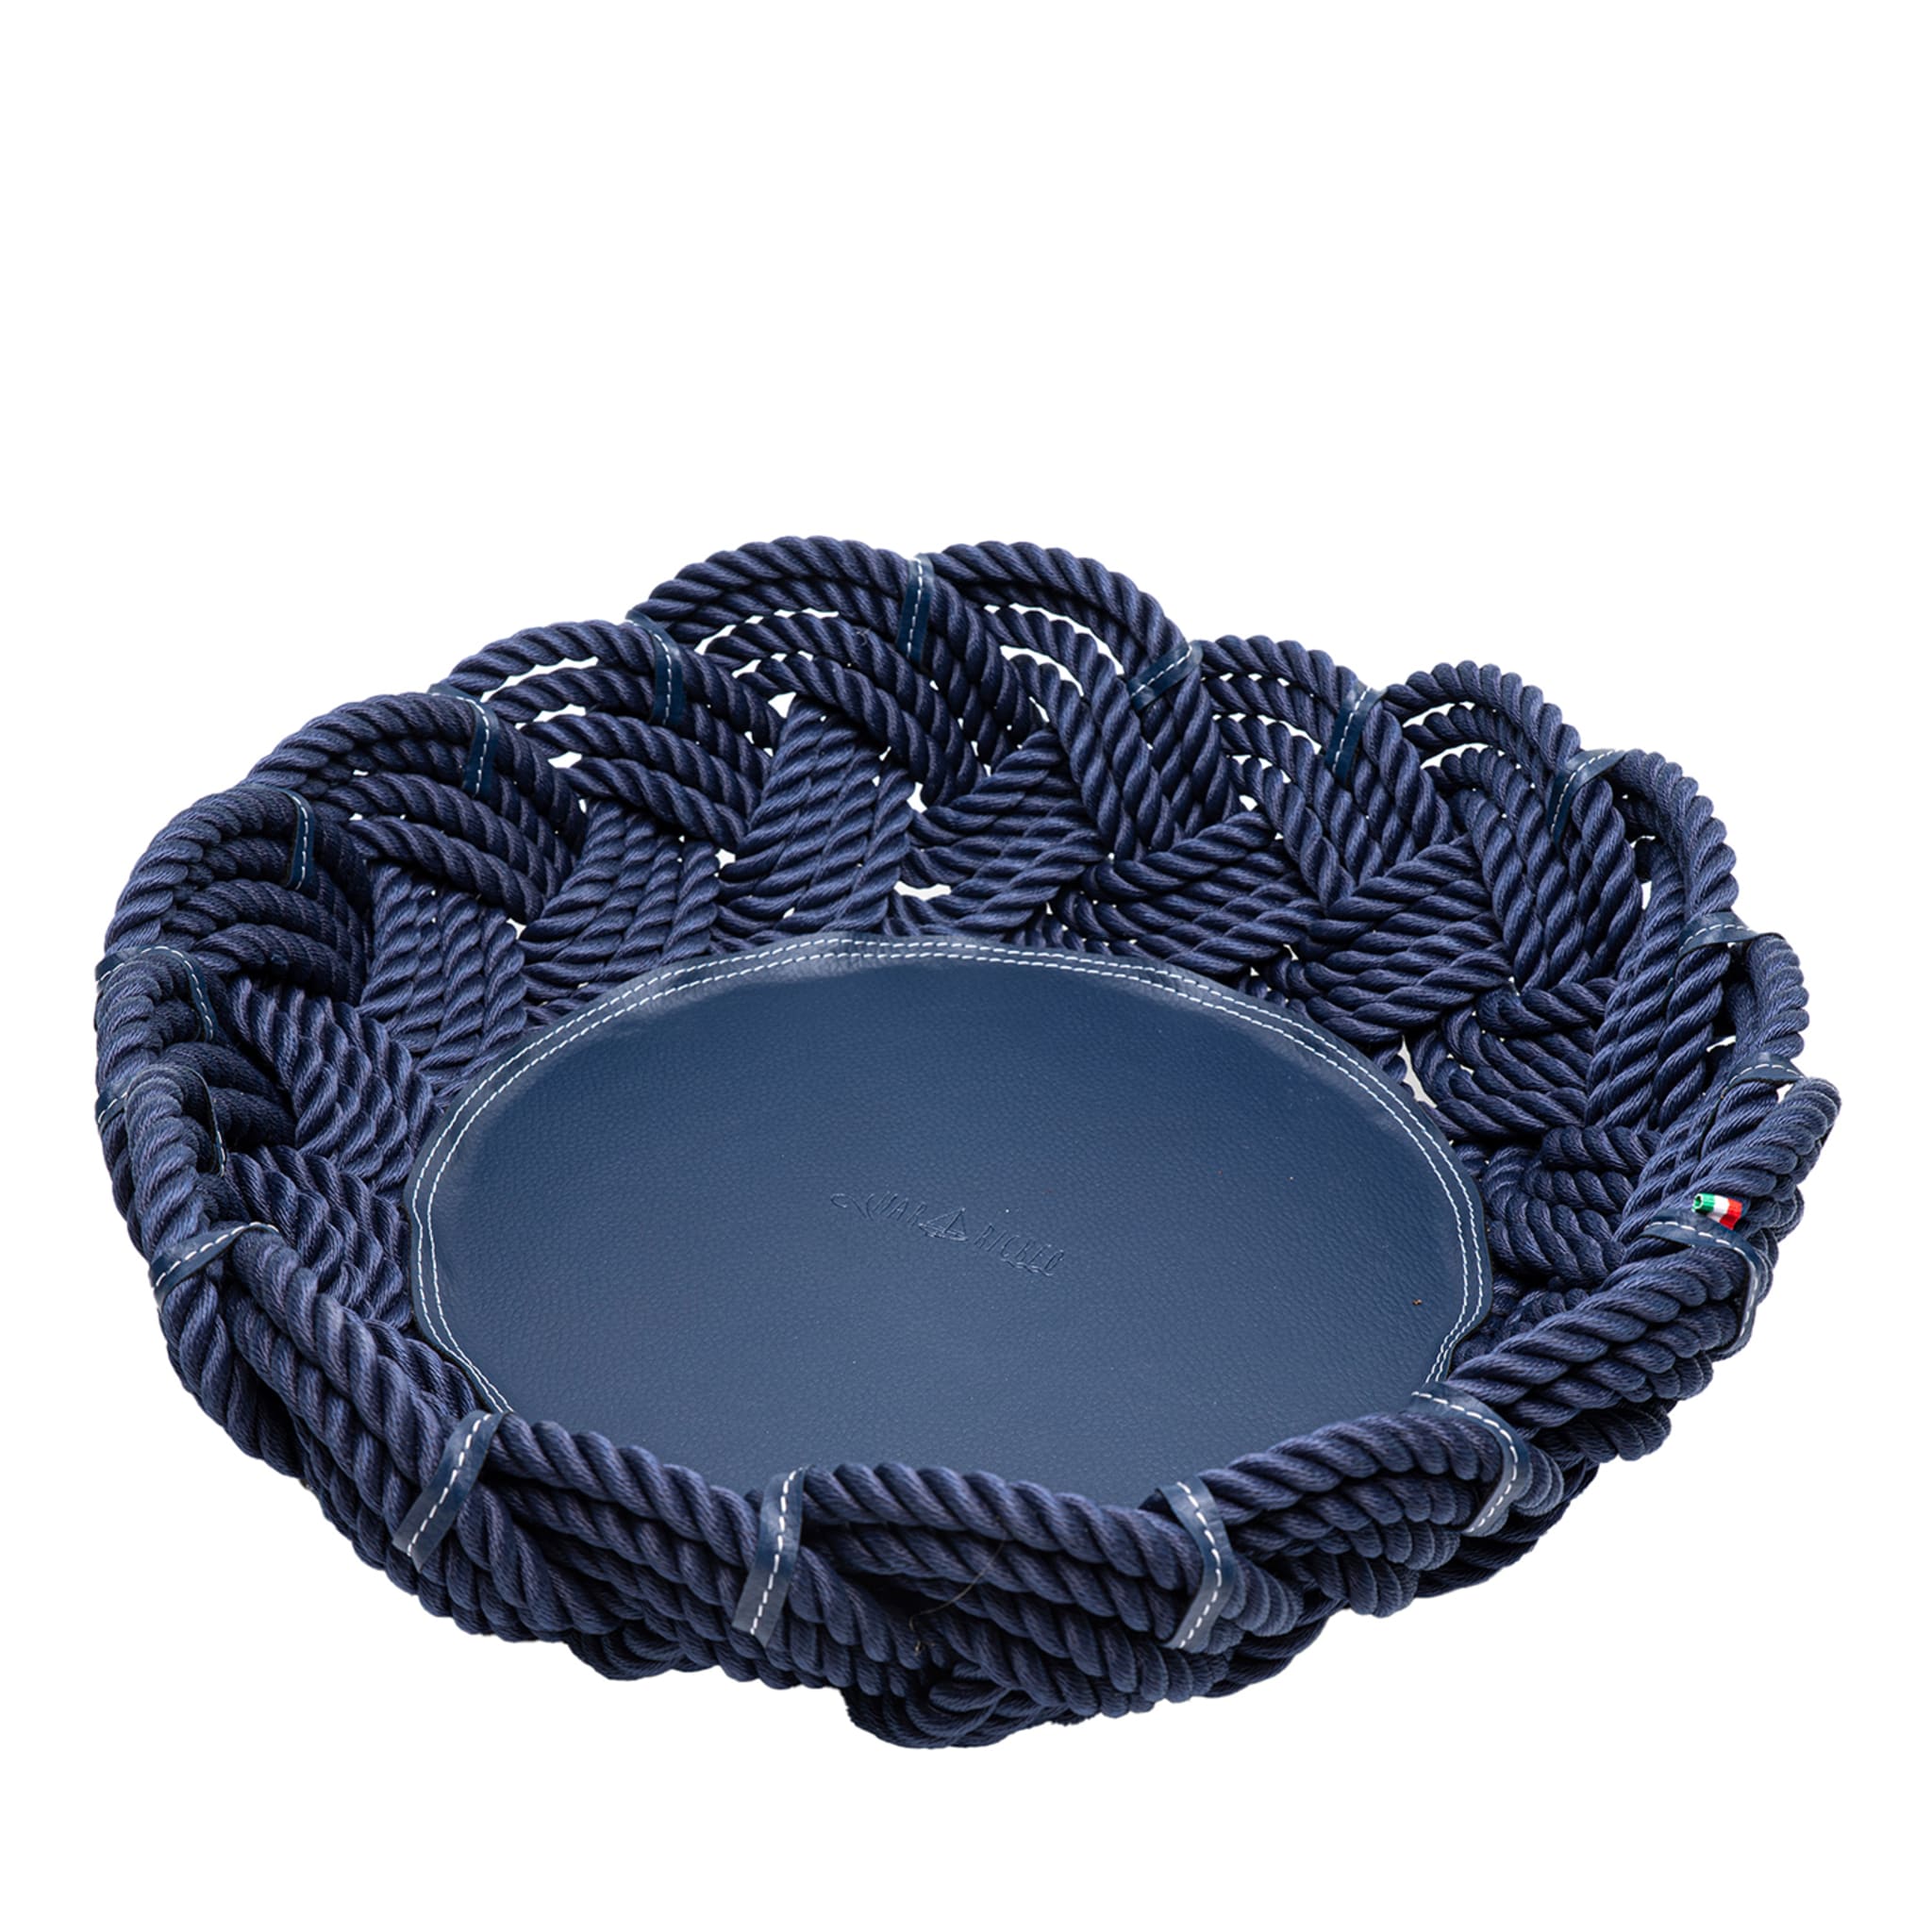 Extra-Large Blue Eco-Leather & Rope Centerpiece Bowl - Main view